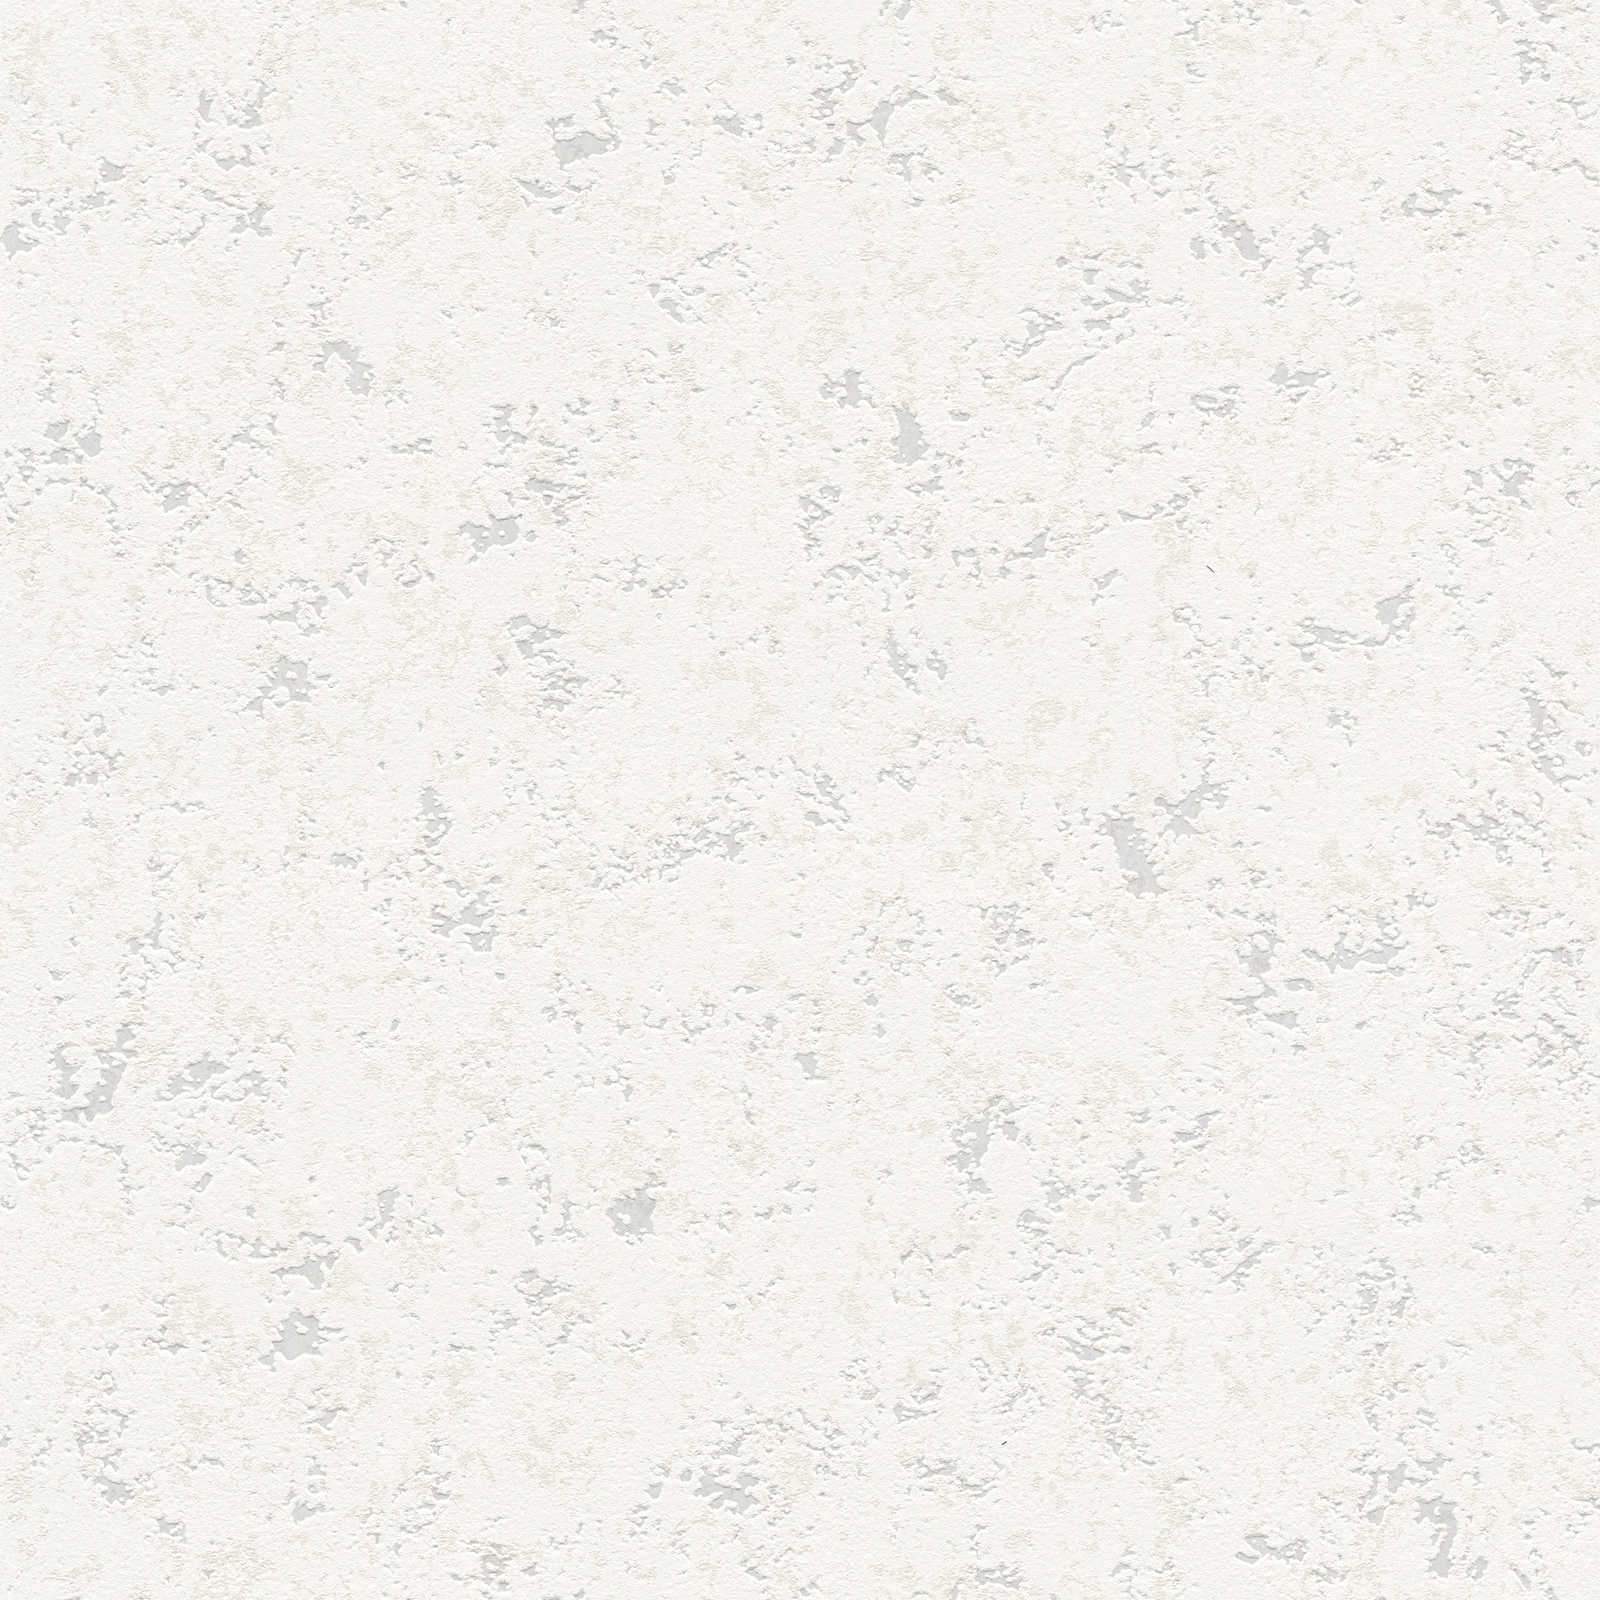 Plaster look wallpaper with rustic foam structure - white
